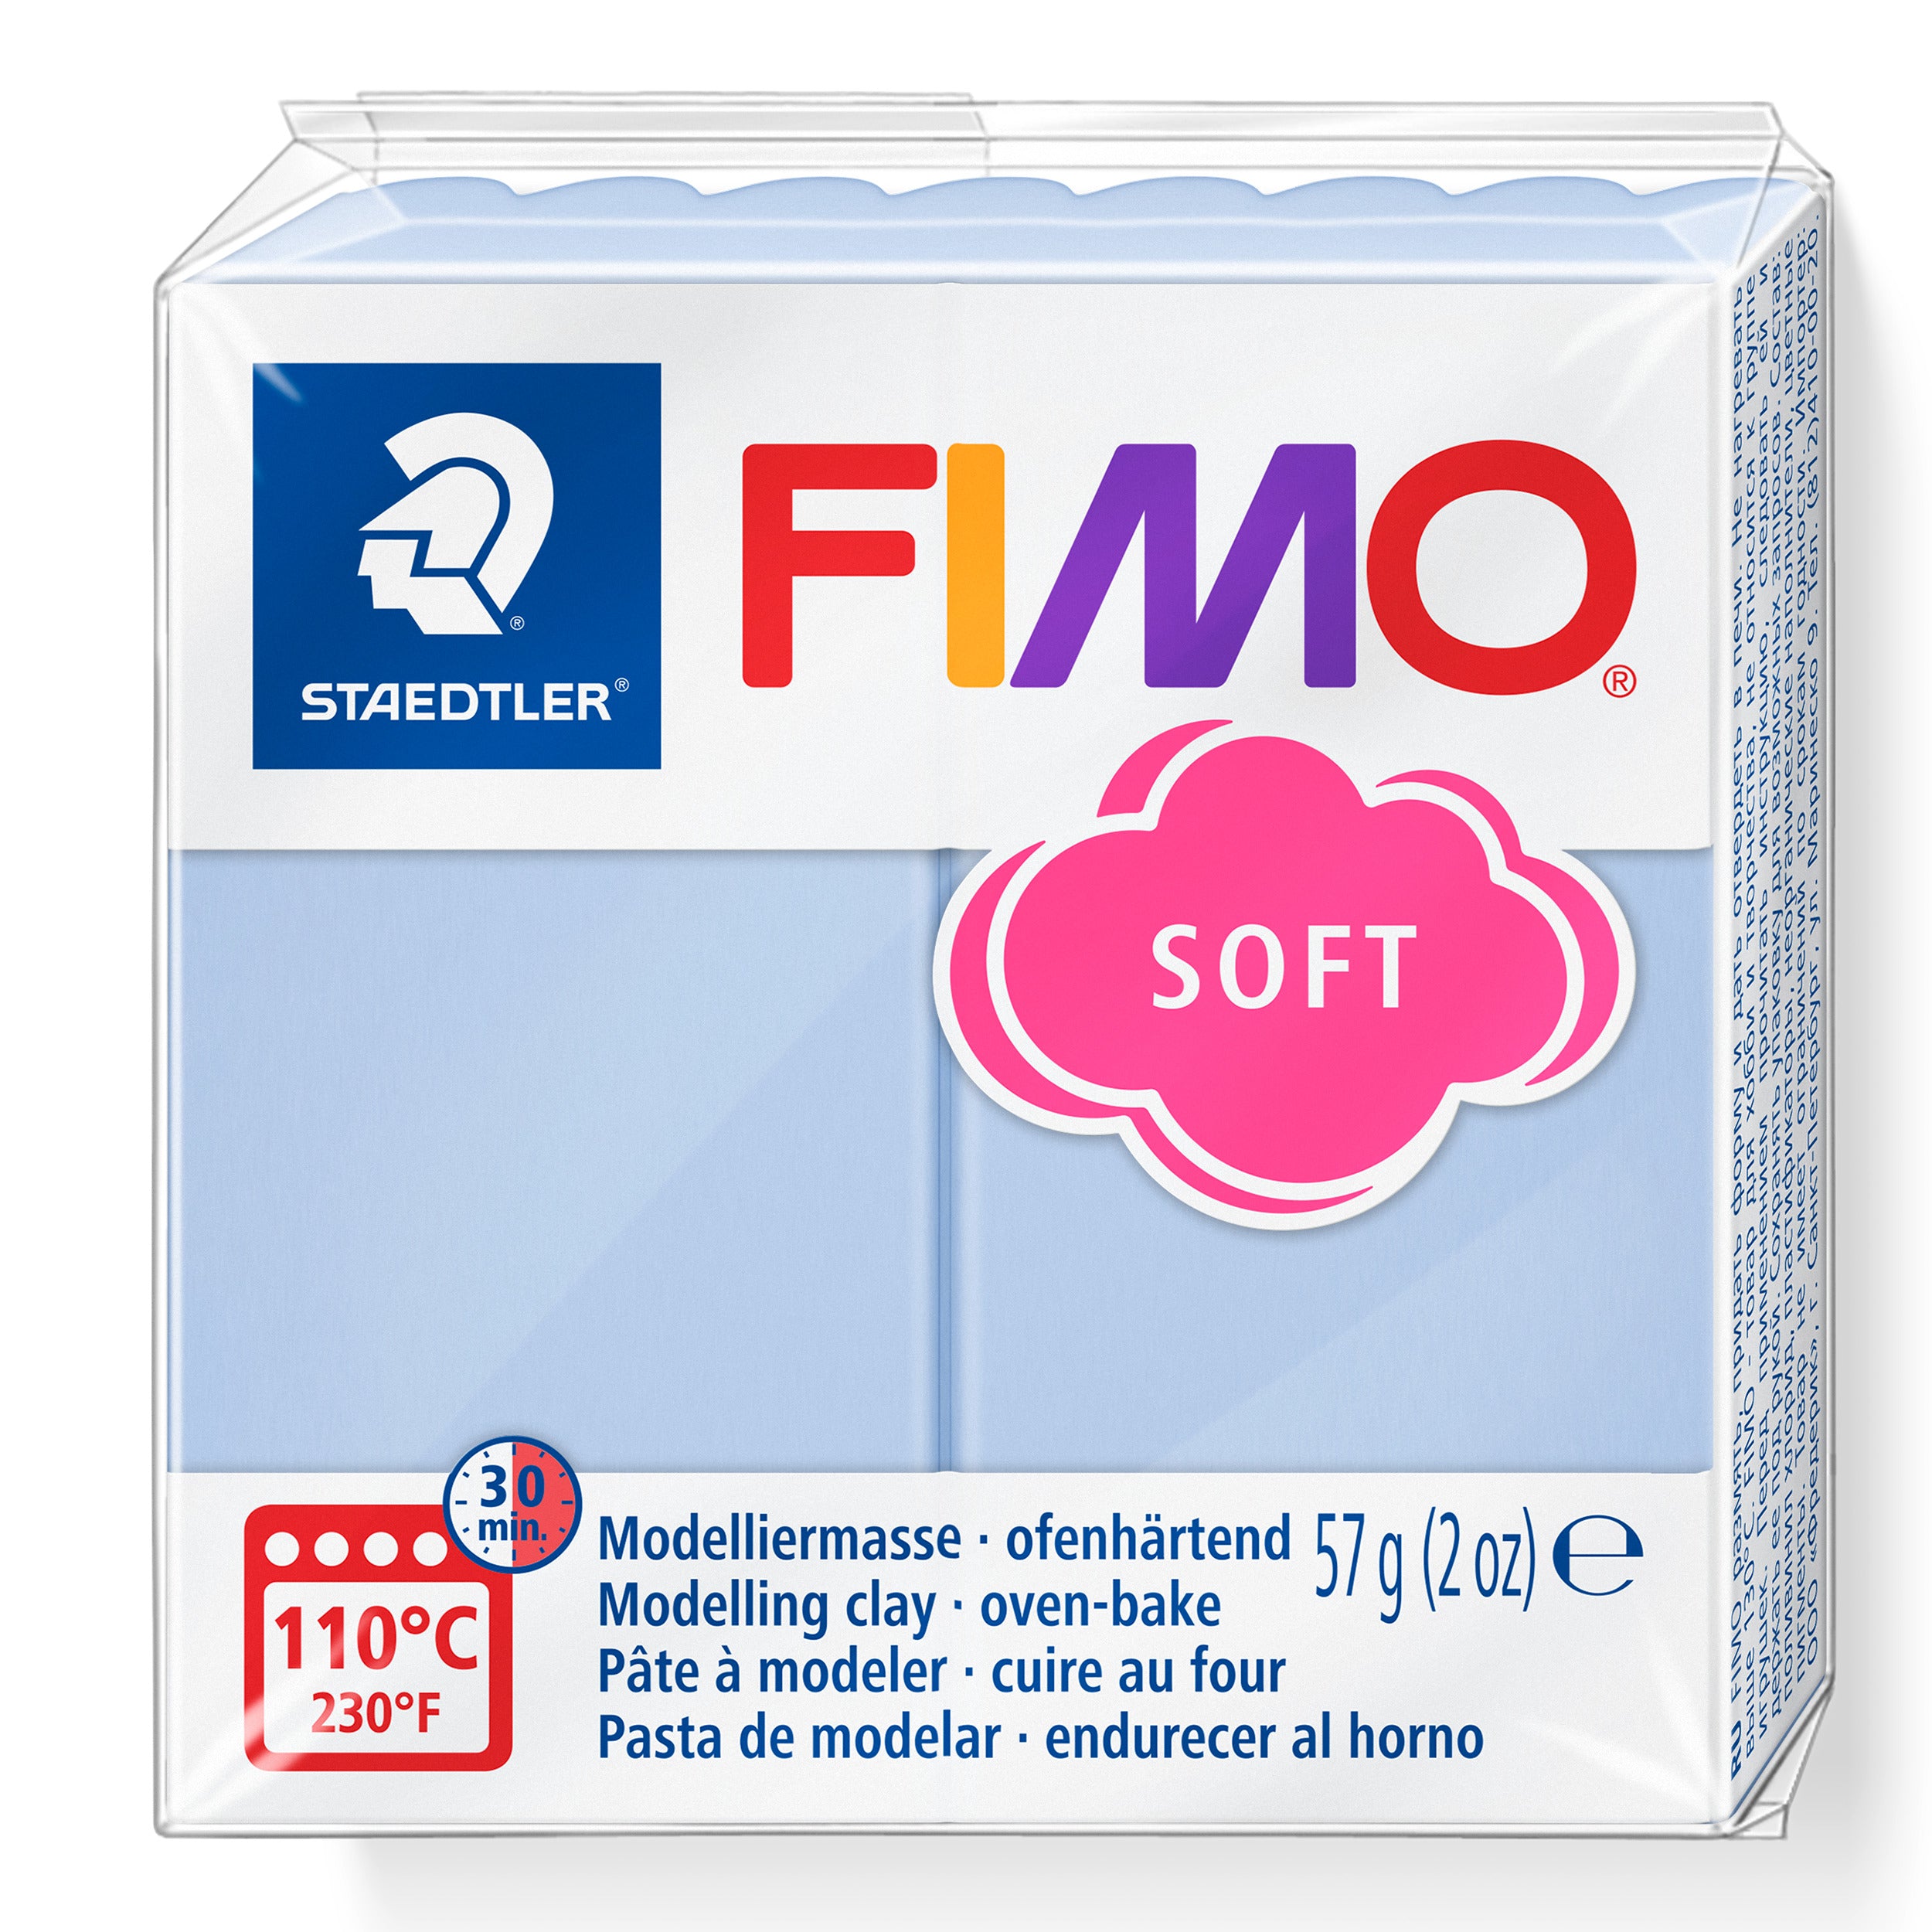 NEW FIMO Soft Polymer Clay 57g Serenity Blue 8020-T31